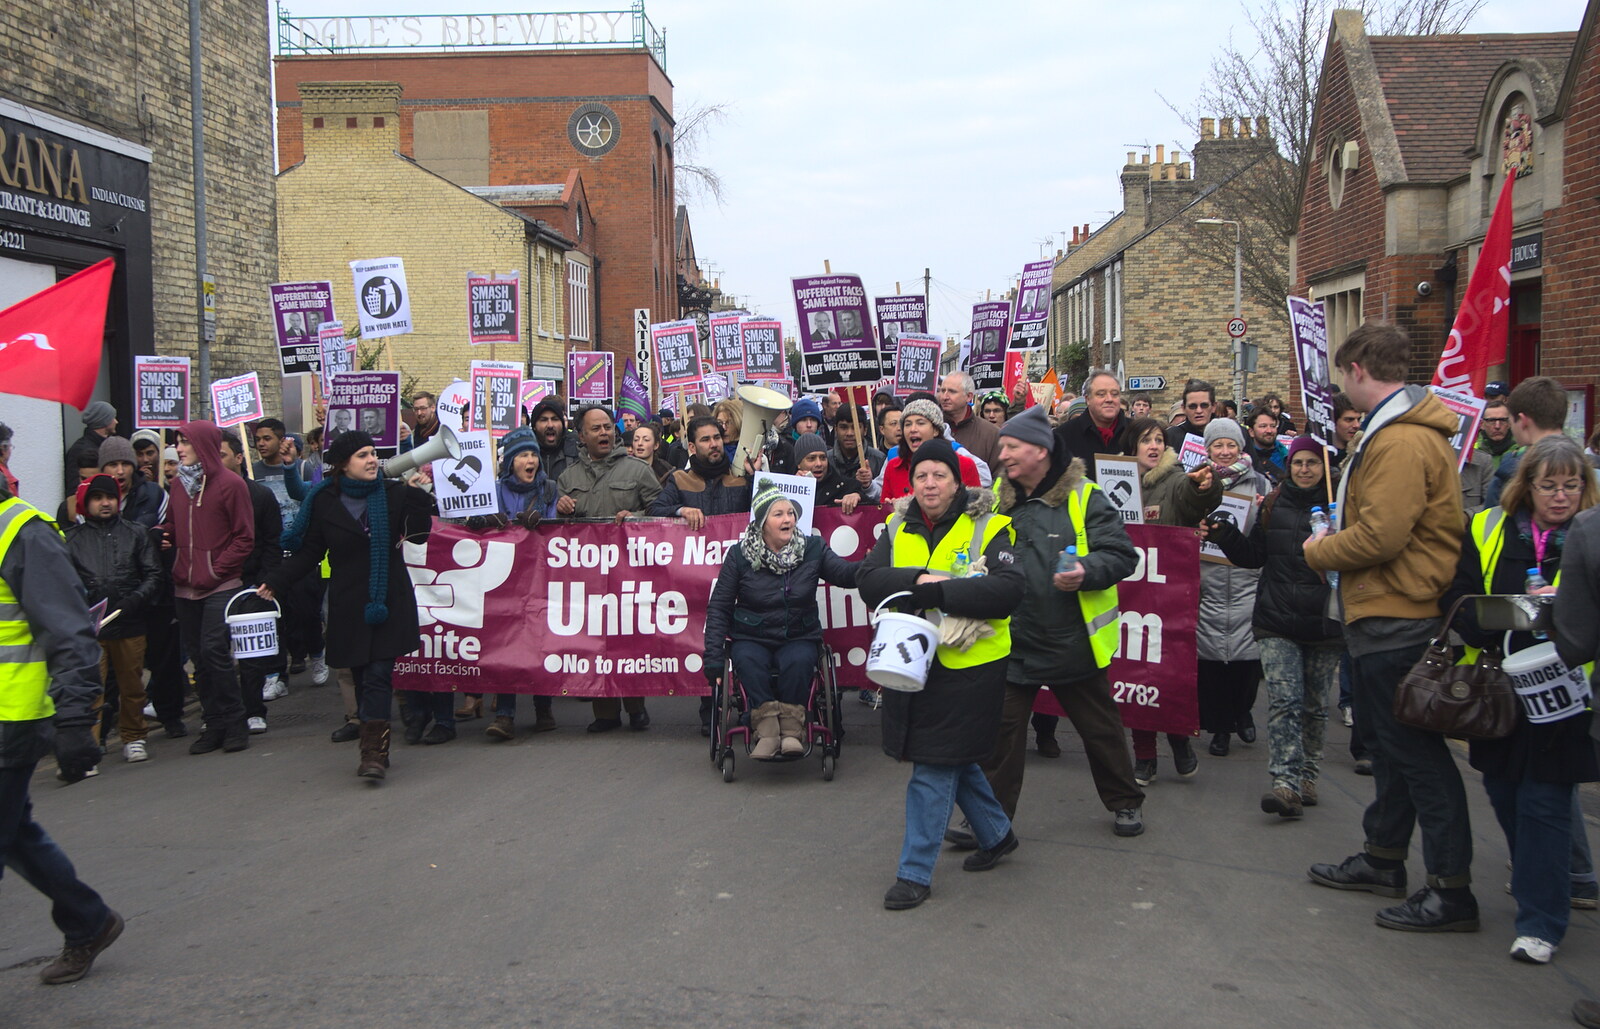 The marchers wait from An Anti-Fascist March, Mill Road, Cambridge - 23rd February 2013